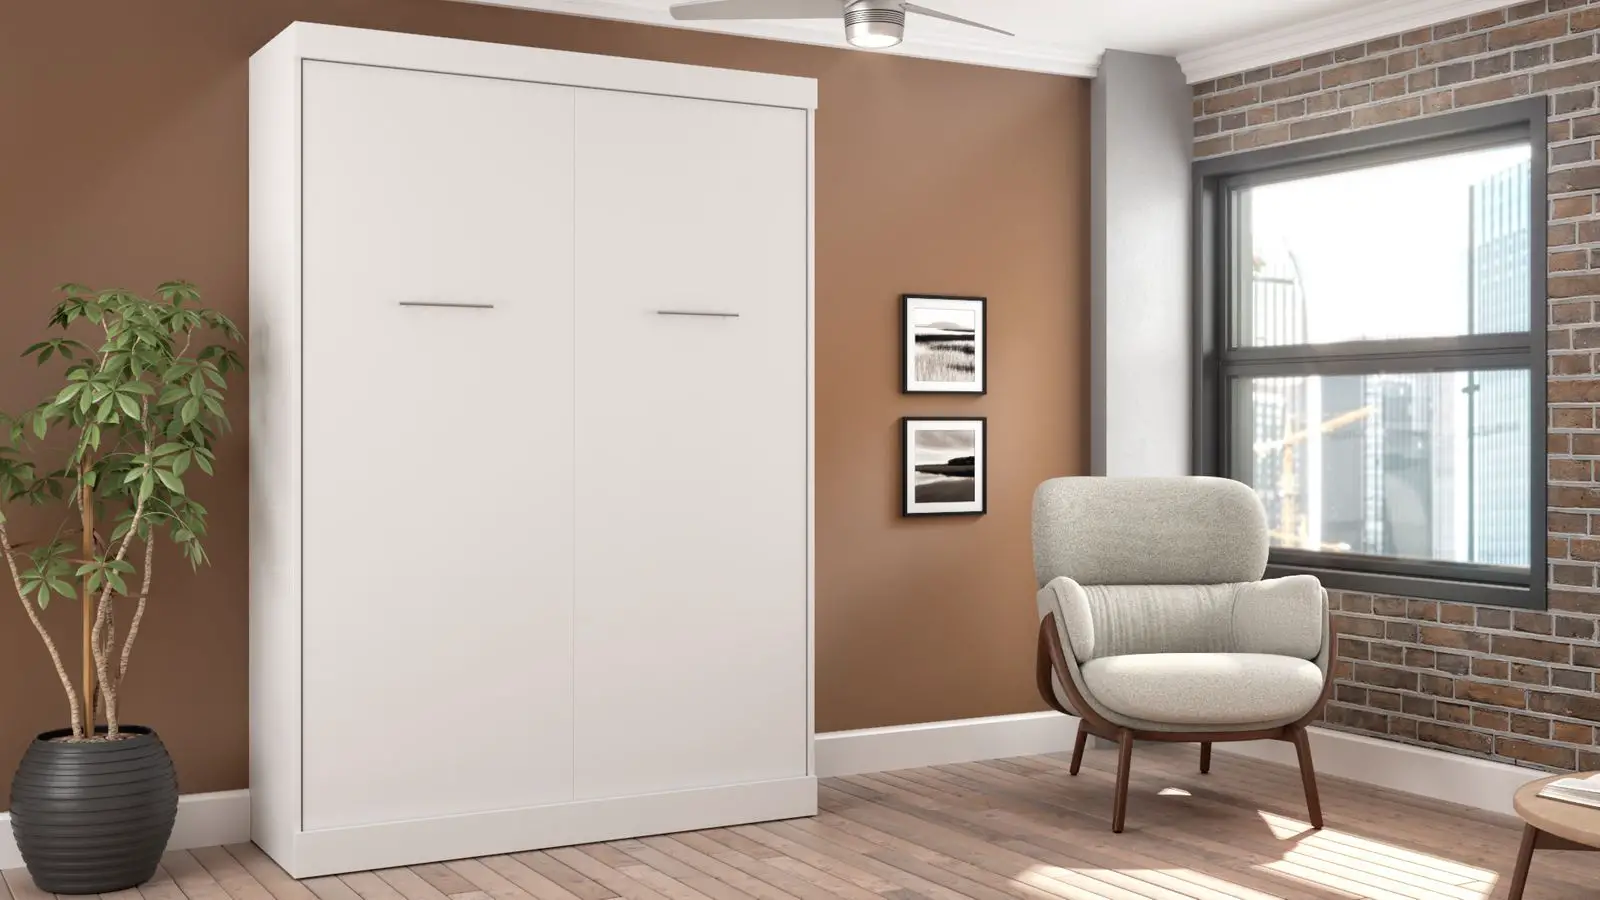 How to Choose the Perfect Murphy Bed for Your Space - A Very Cozy Home